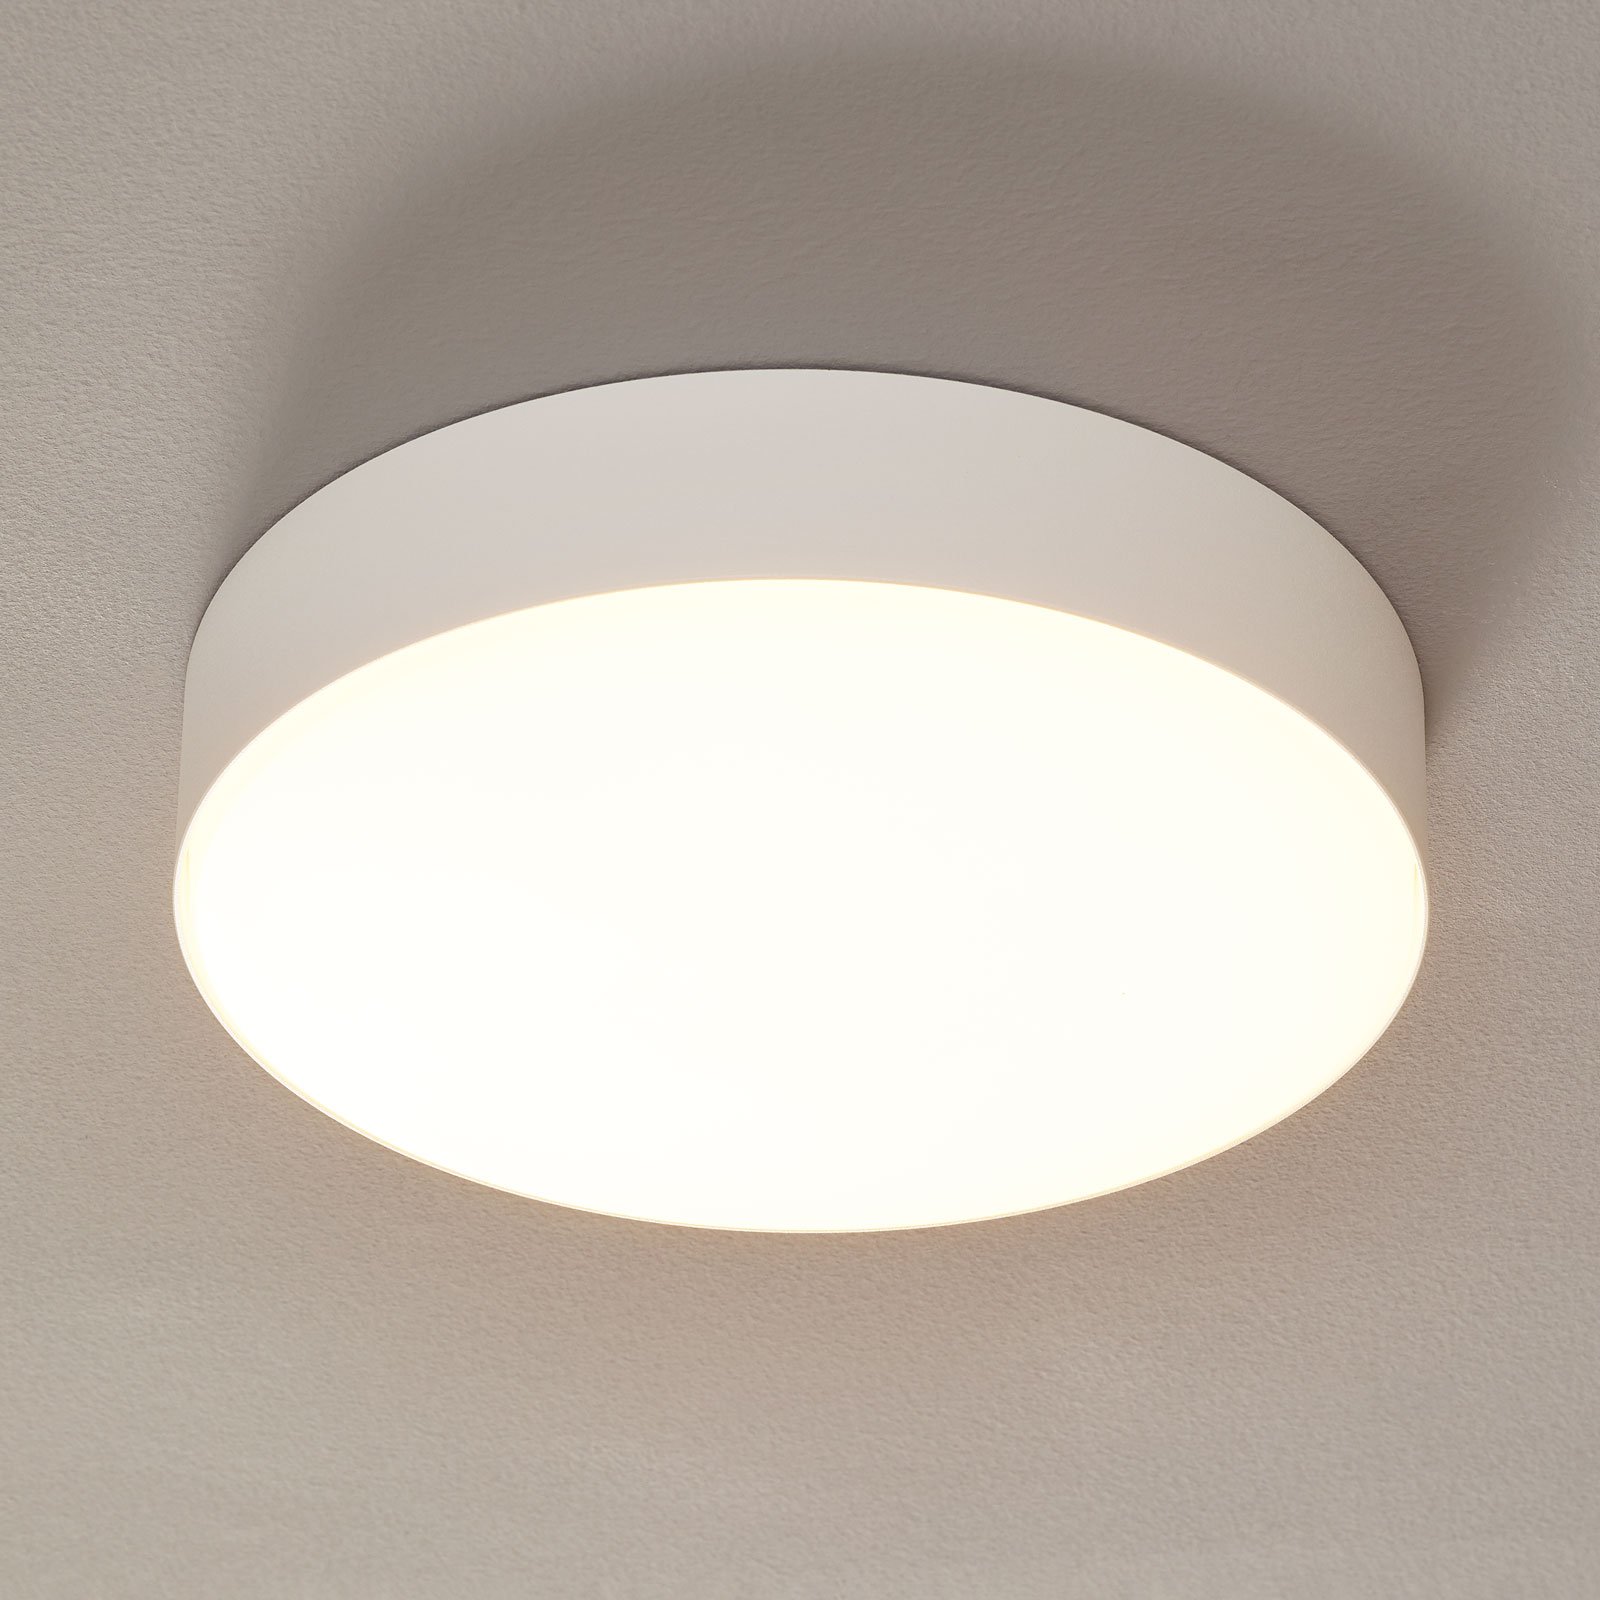 WEVER & DUCRÉ Roby IP44 ceiling 2,700K 26 cm white